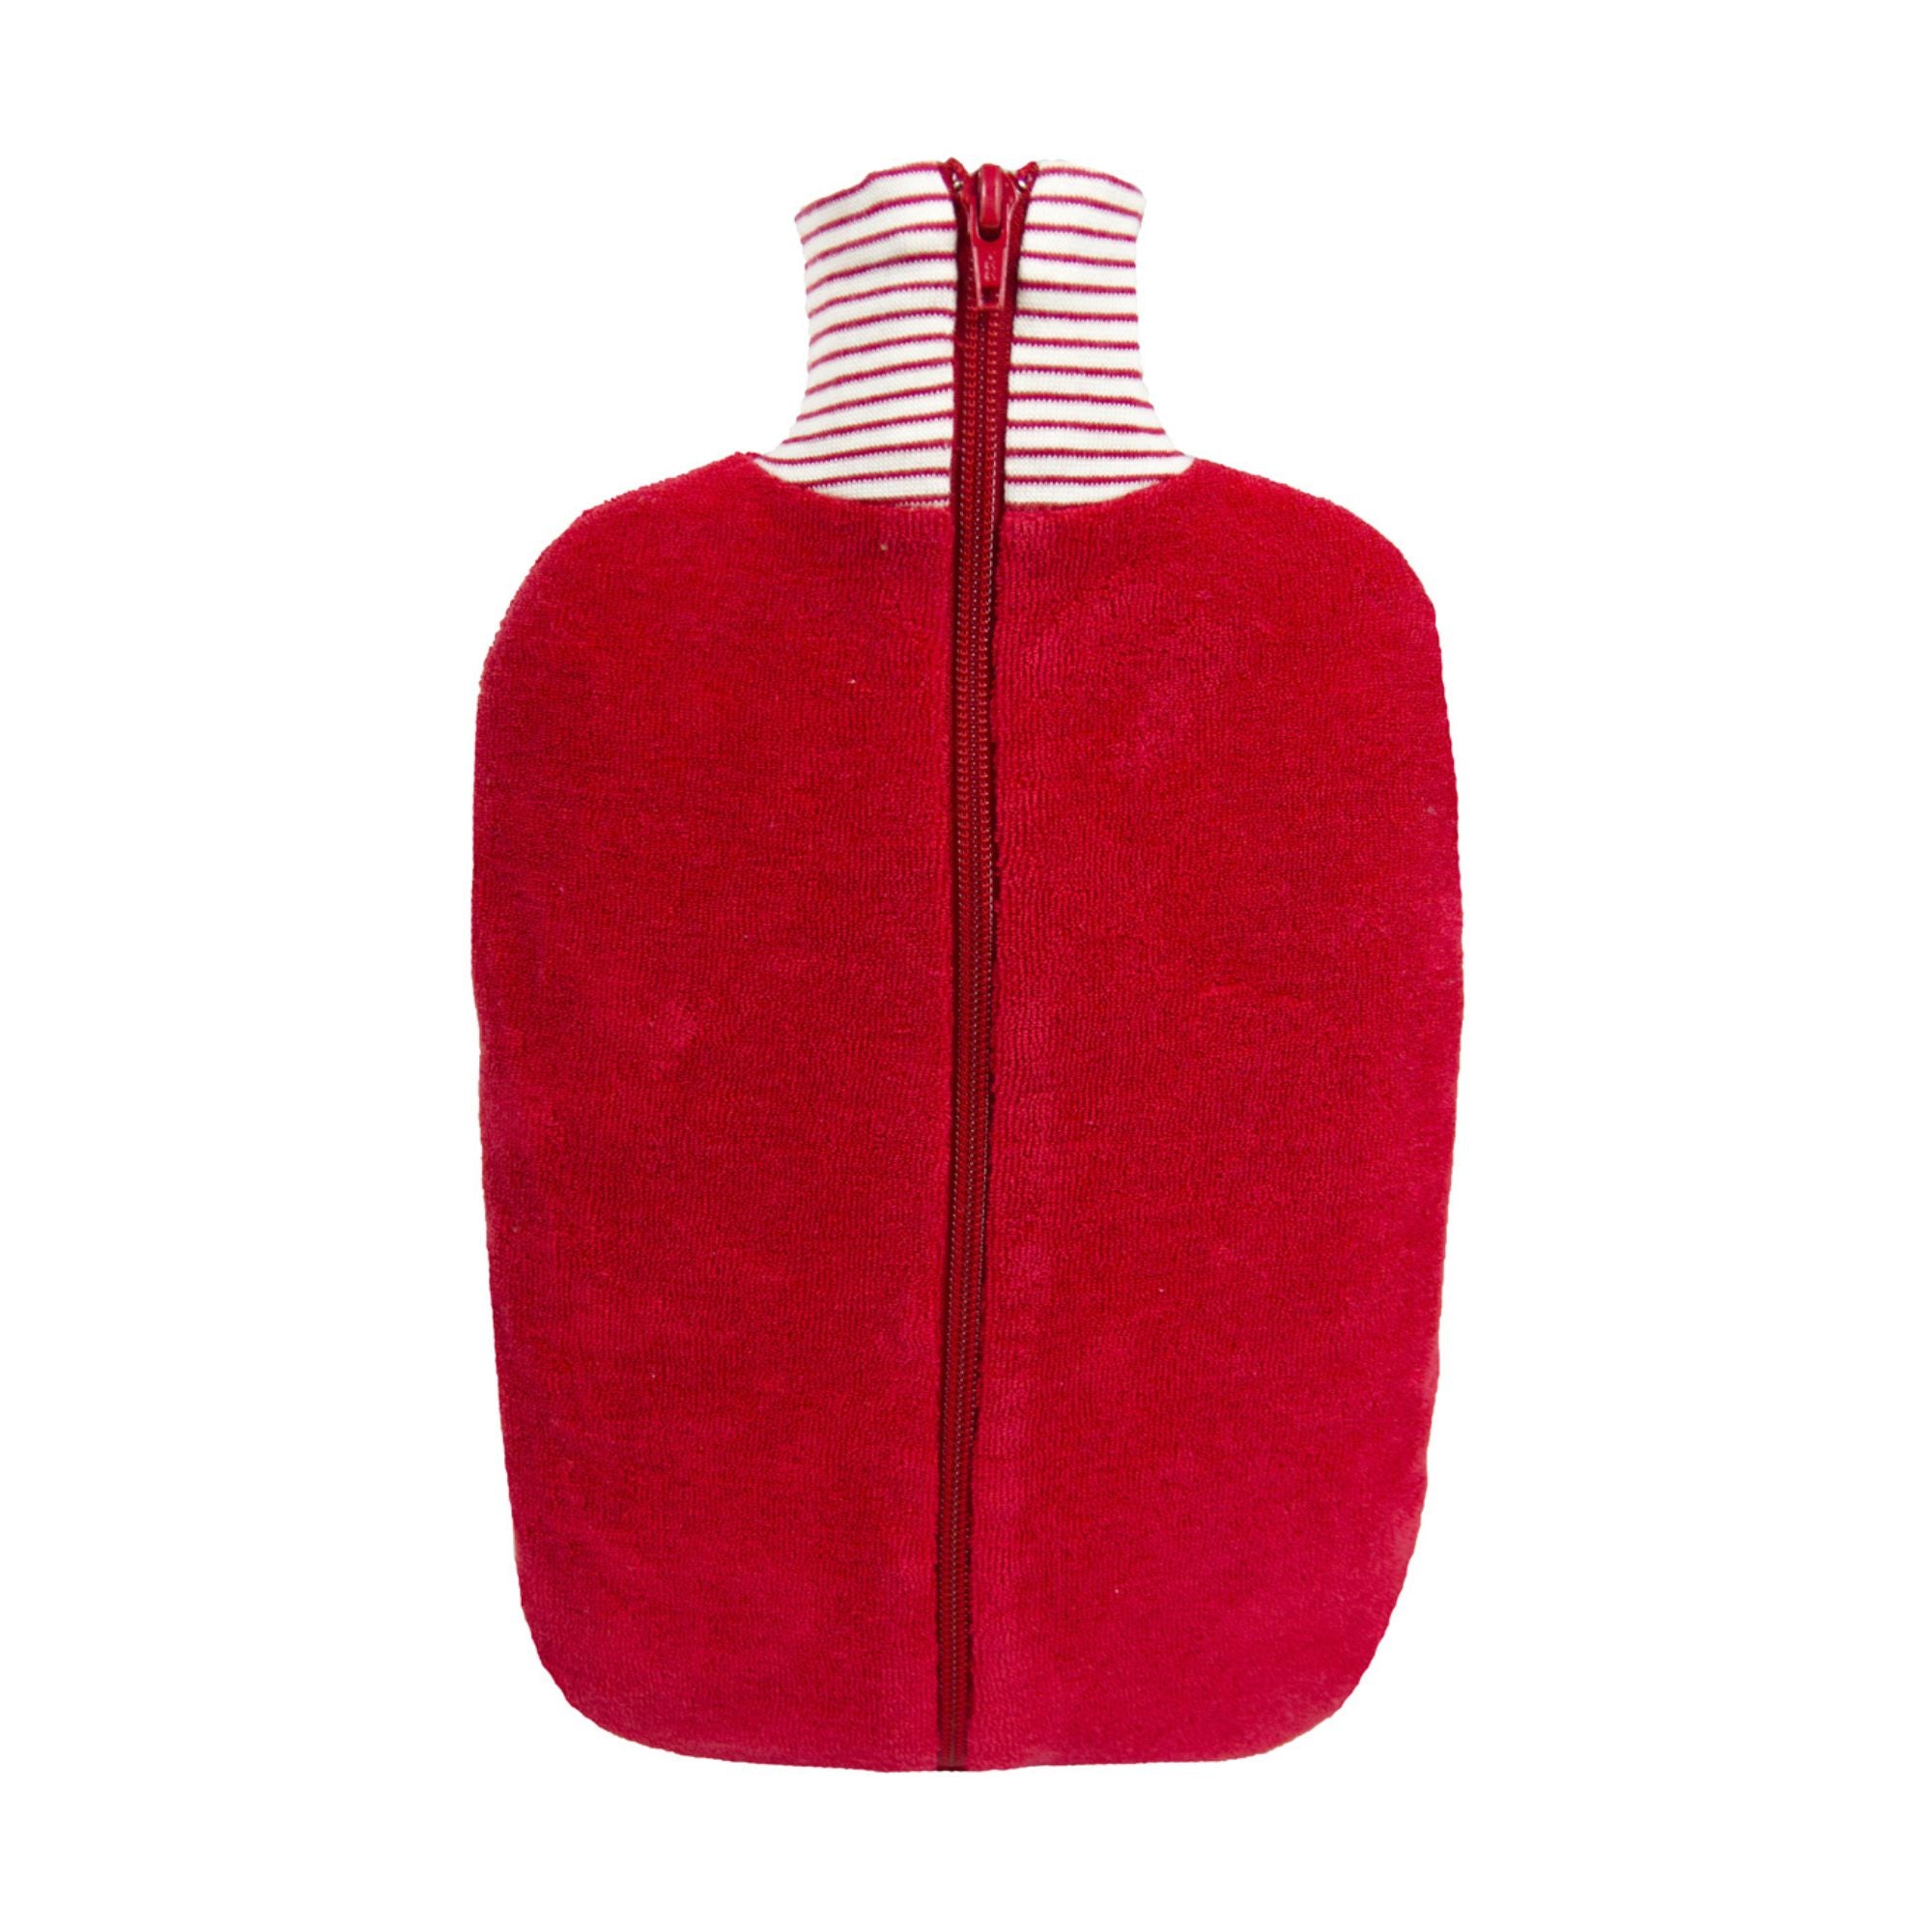 2 Litre Eco Hot Water Bottle with Cherry Red Organic Cotton Cover (rubberless) - Closed